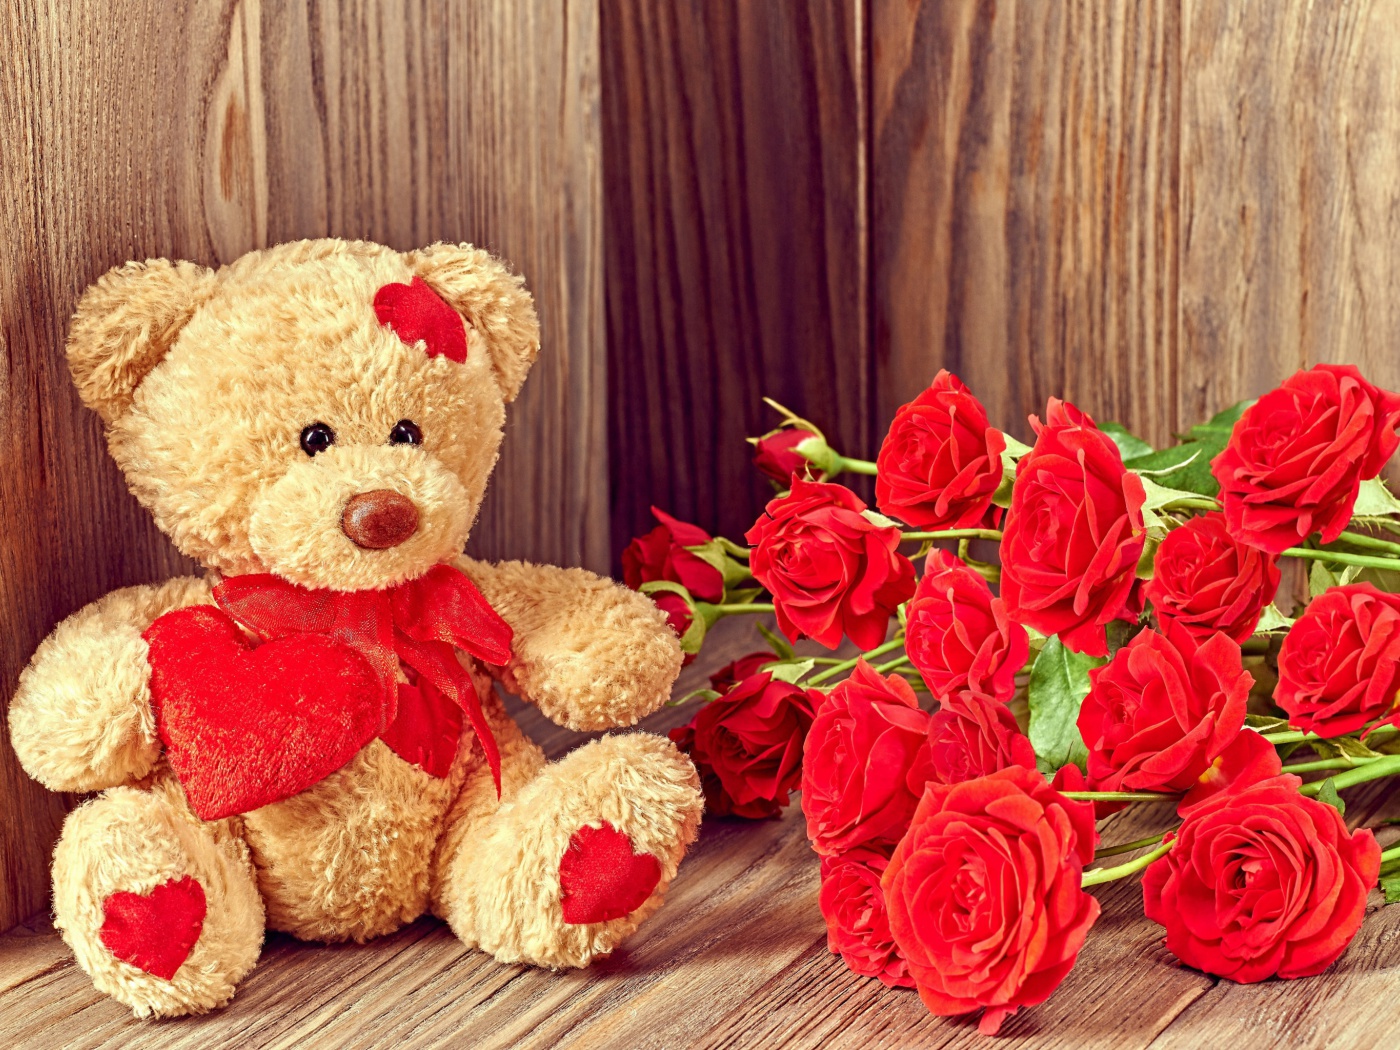 Brodwn Teddy Bear Gift for Saint Valentines Day wallpaper 1400x1050